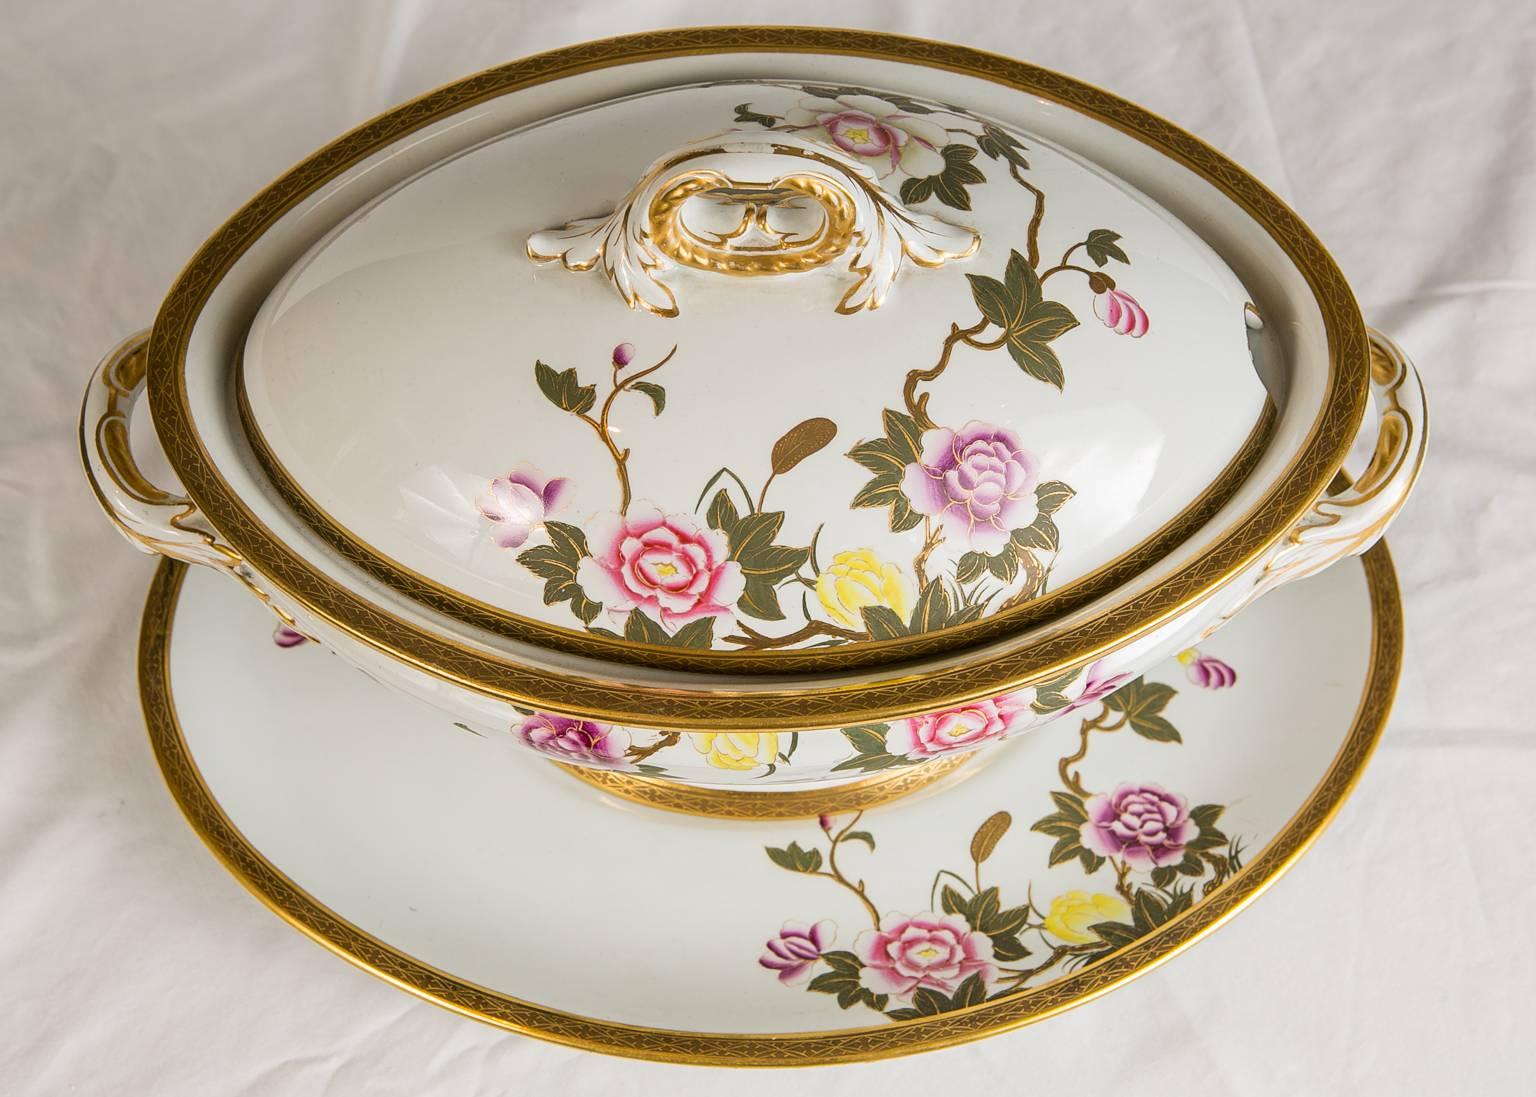 Royal Worcester Porcelain Soup Tureen Made in 1851 In Excellent Condition For Sale In Katonah, NY